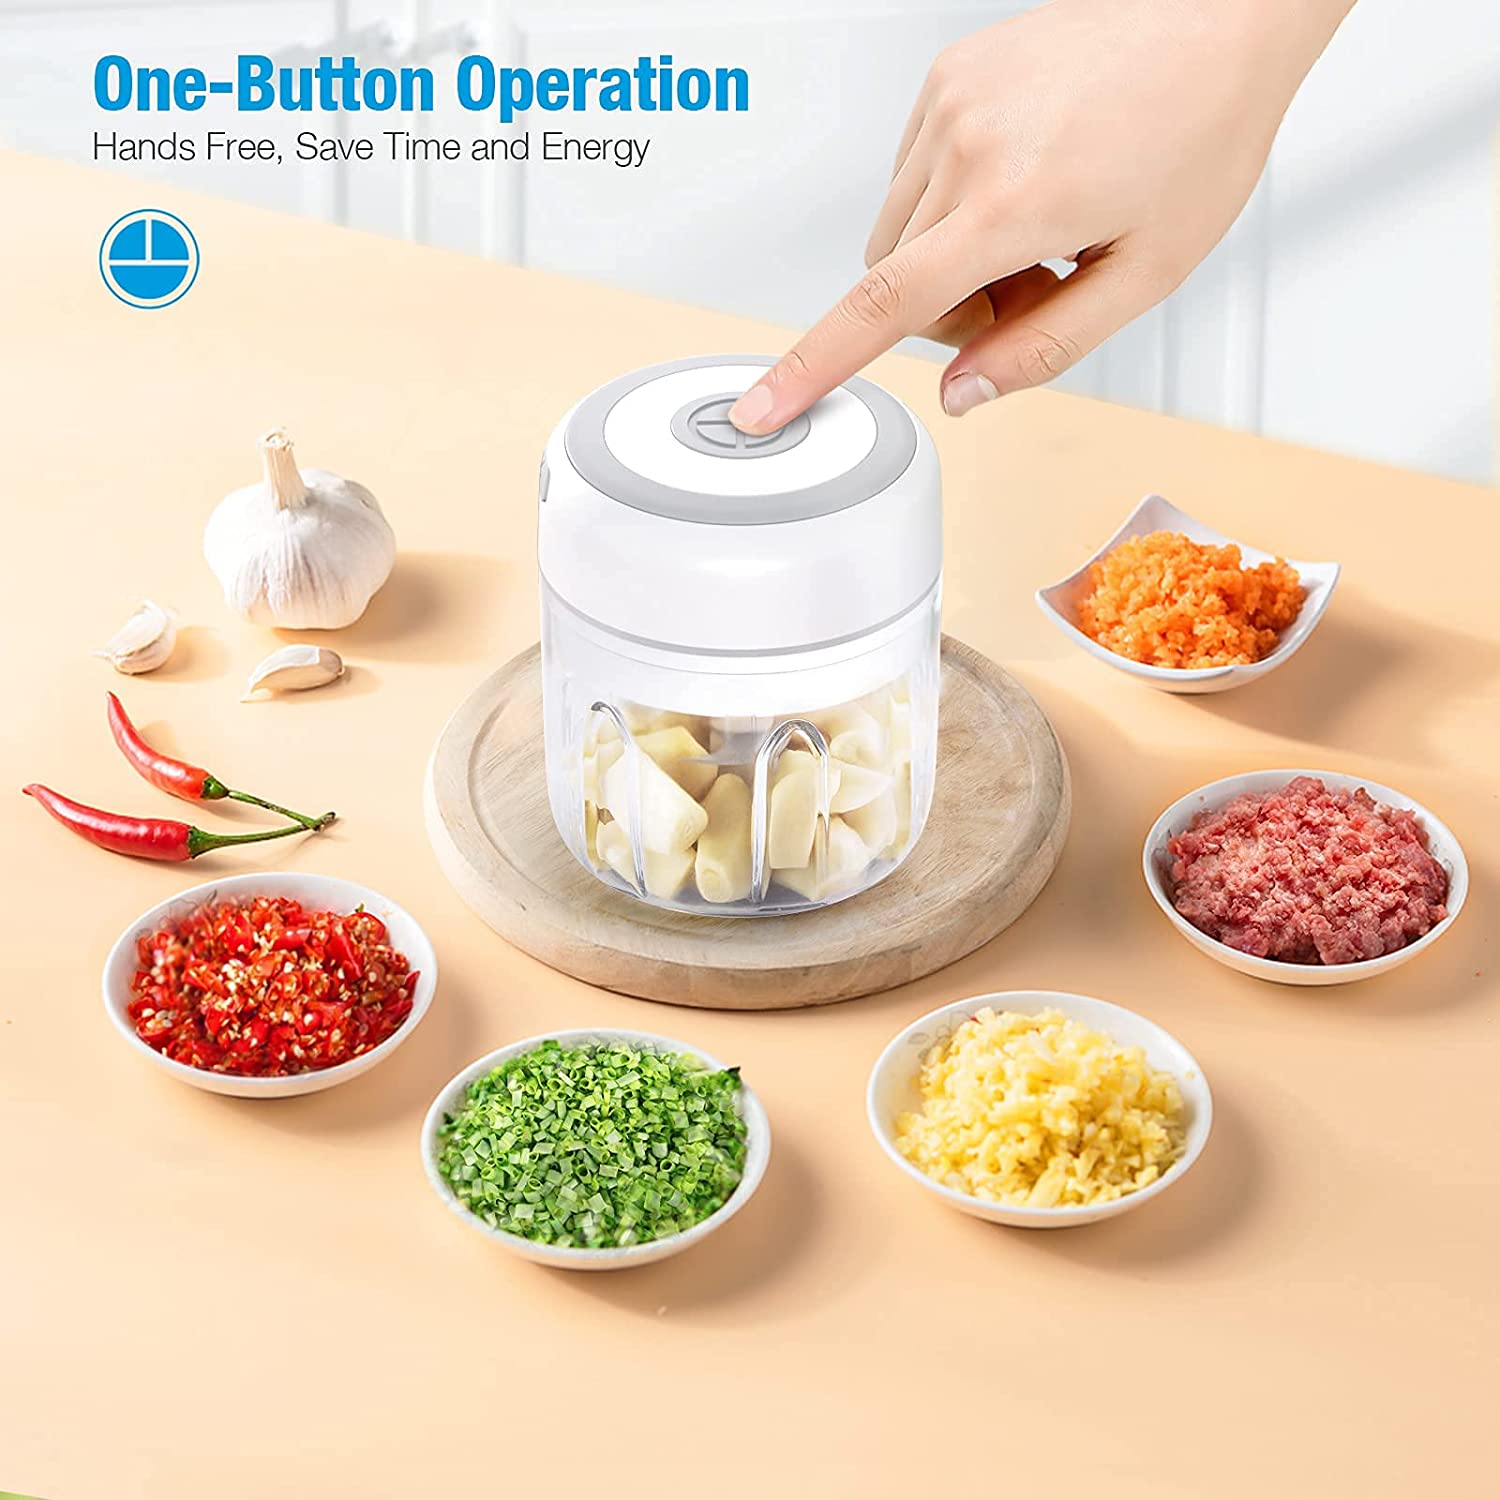 How a Mini Food Processor Can Make Cooking Easier